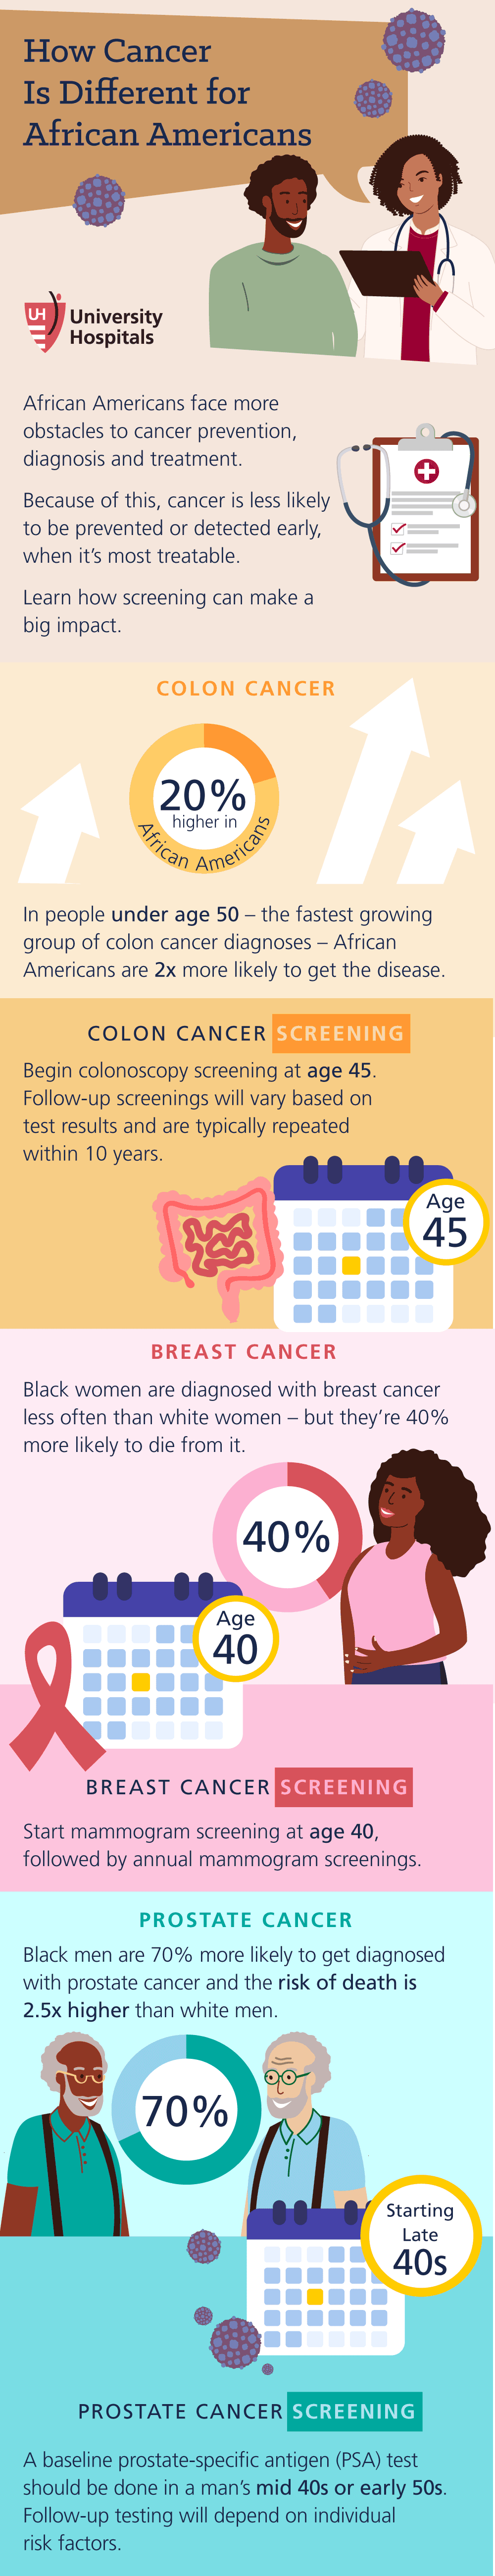 How Cancer is Different for African Americans